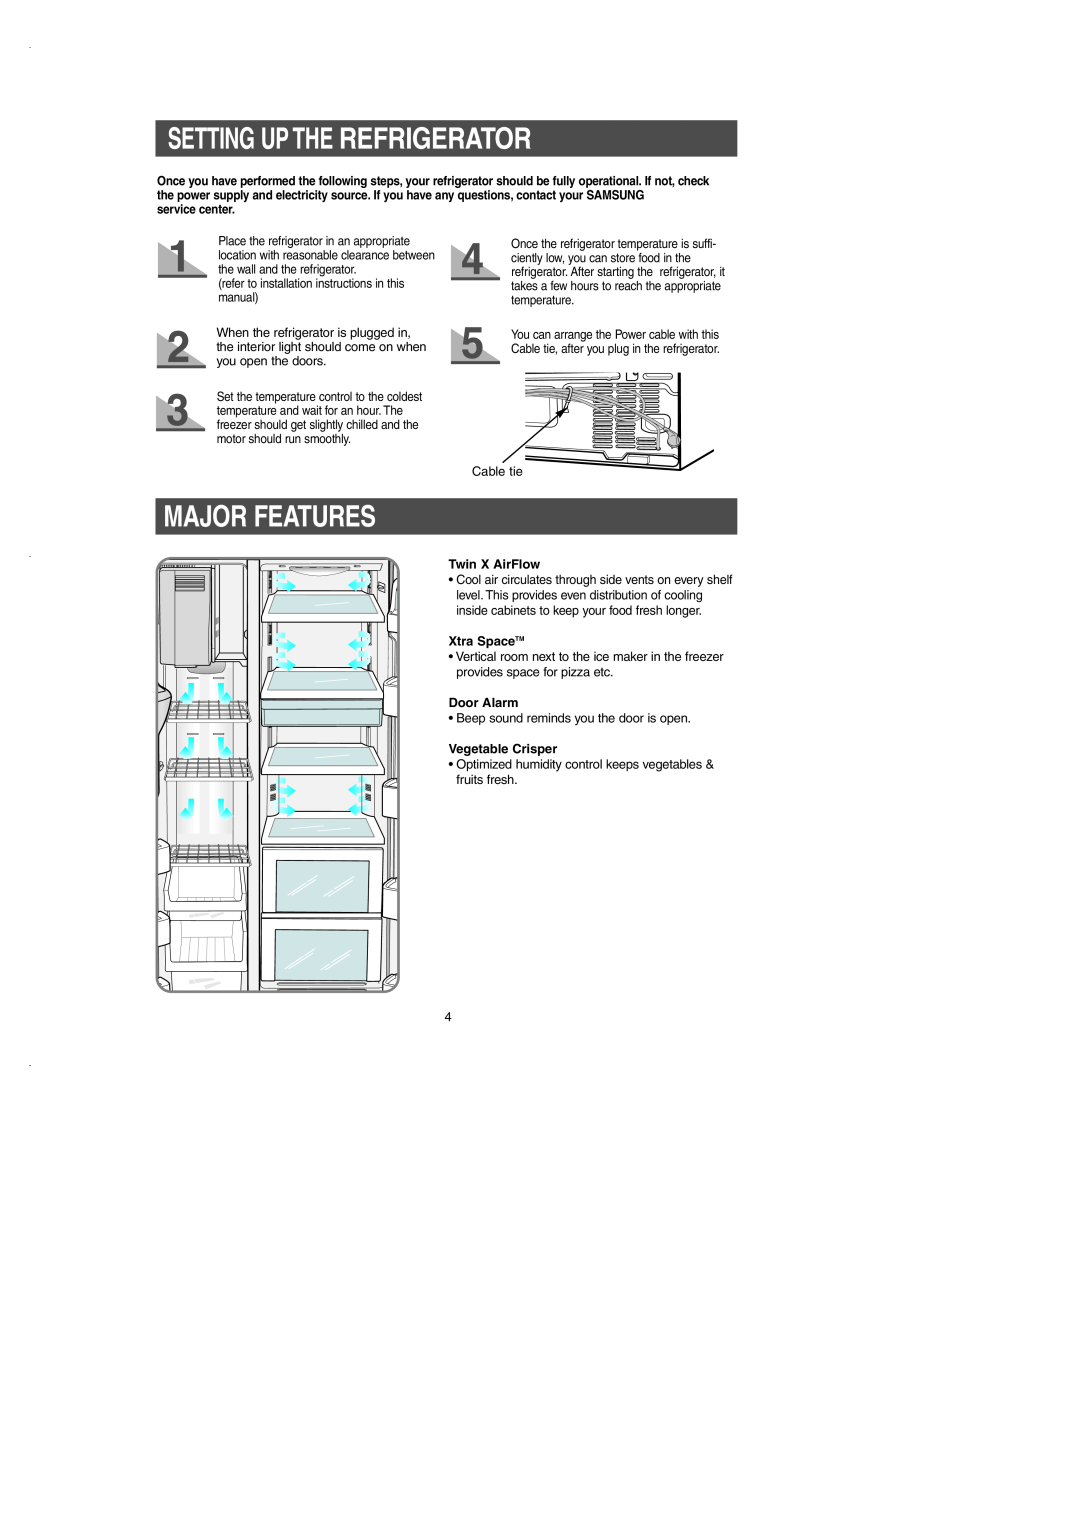 Samsung RS2530BWP Setting Up The Refrigerator, Major Features, service center, Twin X AirFlow, Xtra SpaceTM, Door Alarm 